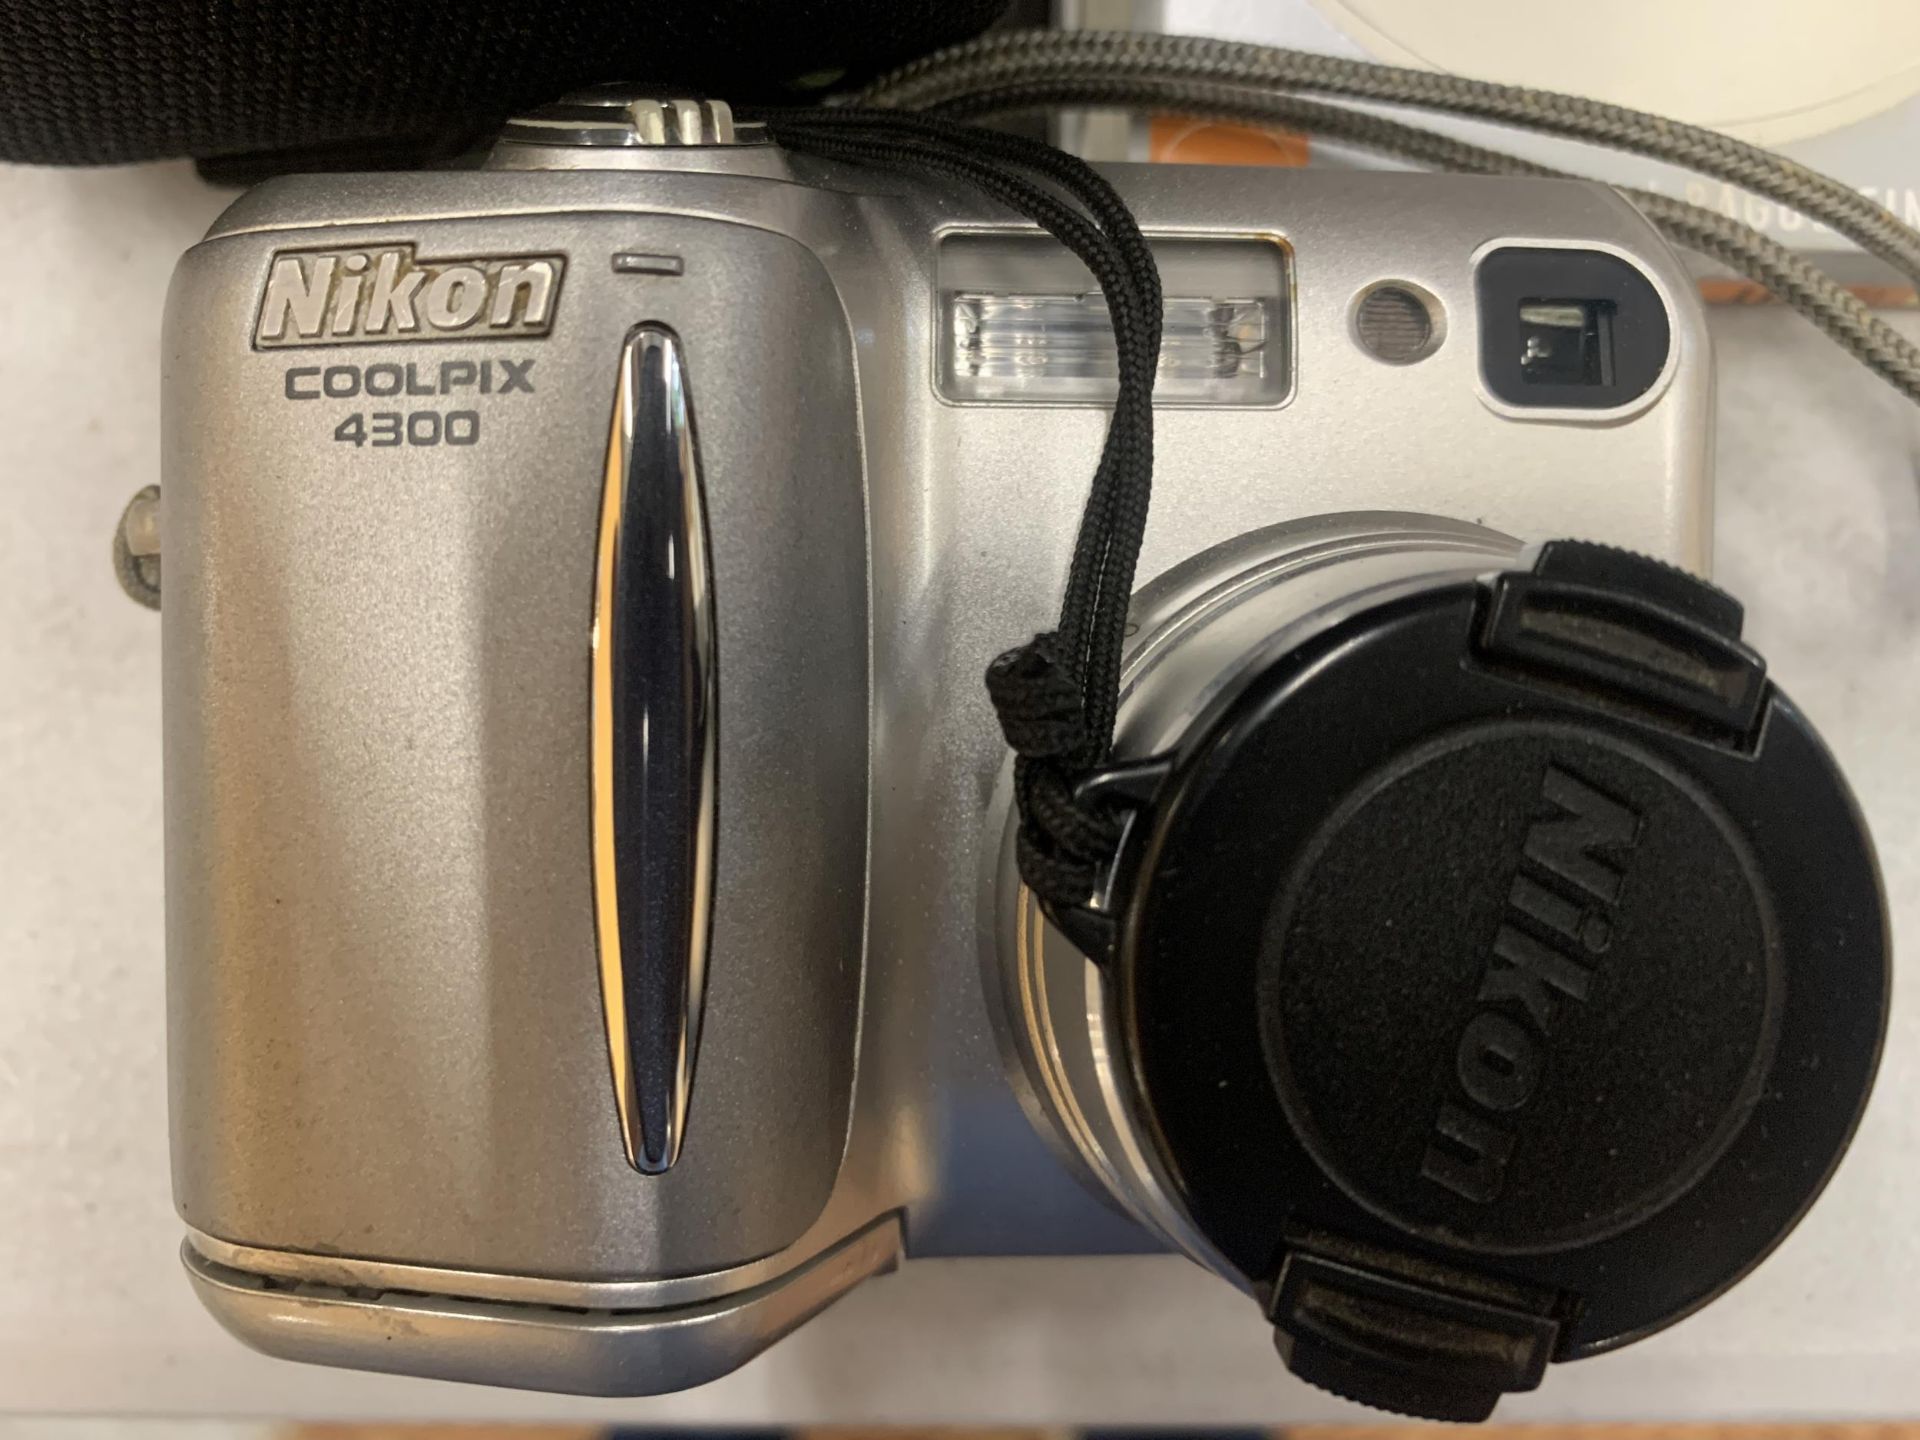 A NIKON COOLPIX 4300 CAMERA WITH CASE AND ACCESSORIES - Image 2 of 4